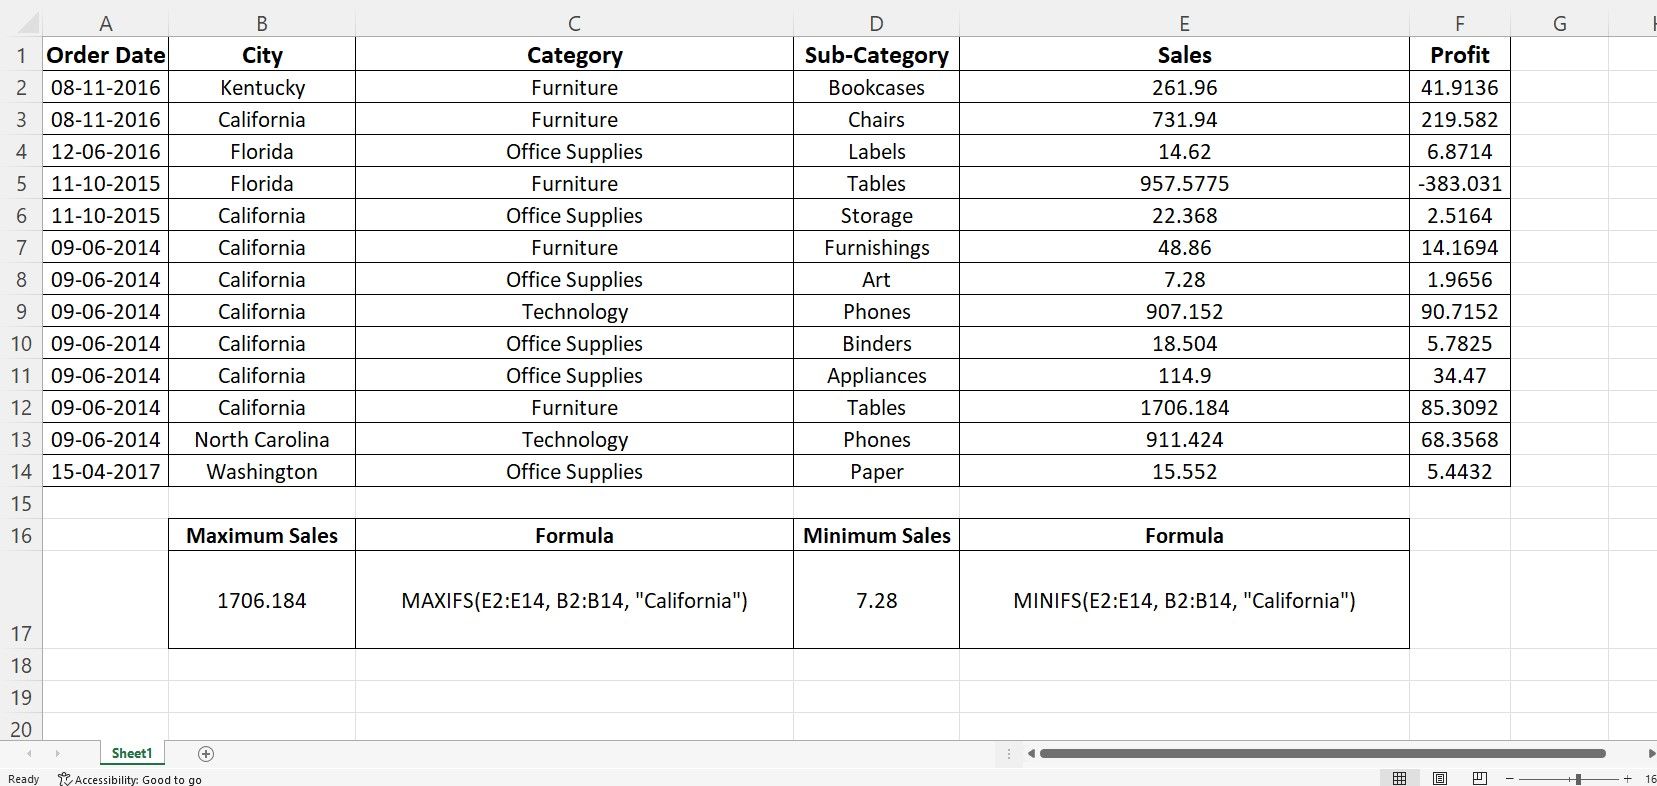 Excel interface showing the usage of MAXIFS and MINIFS functions